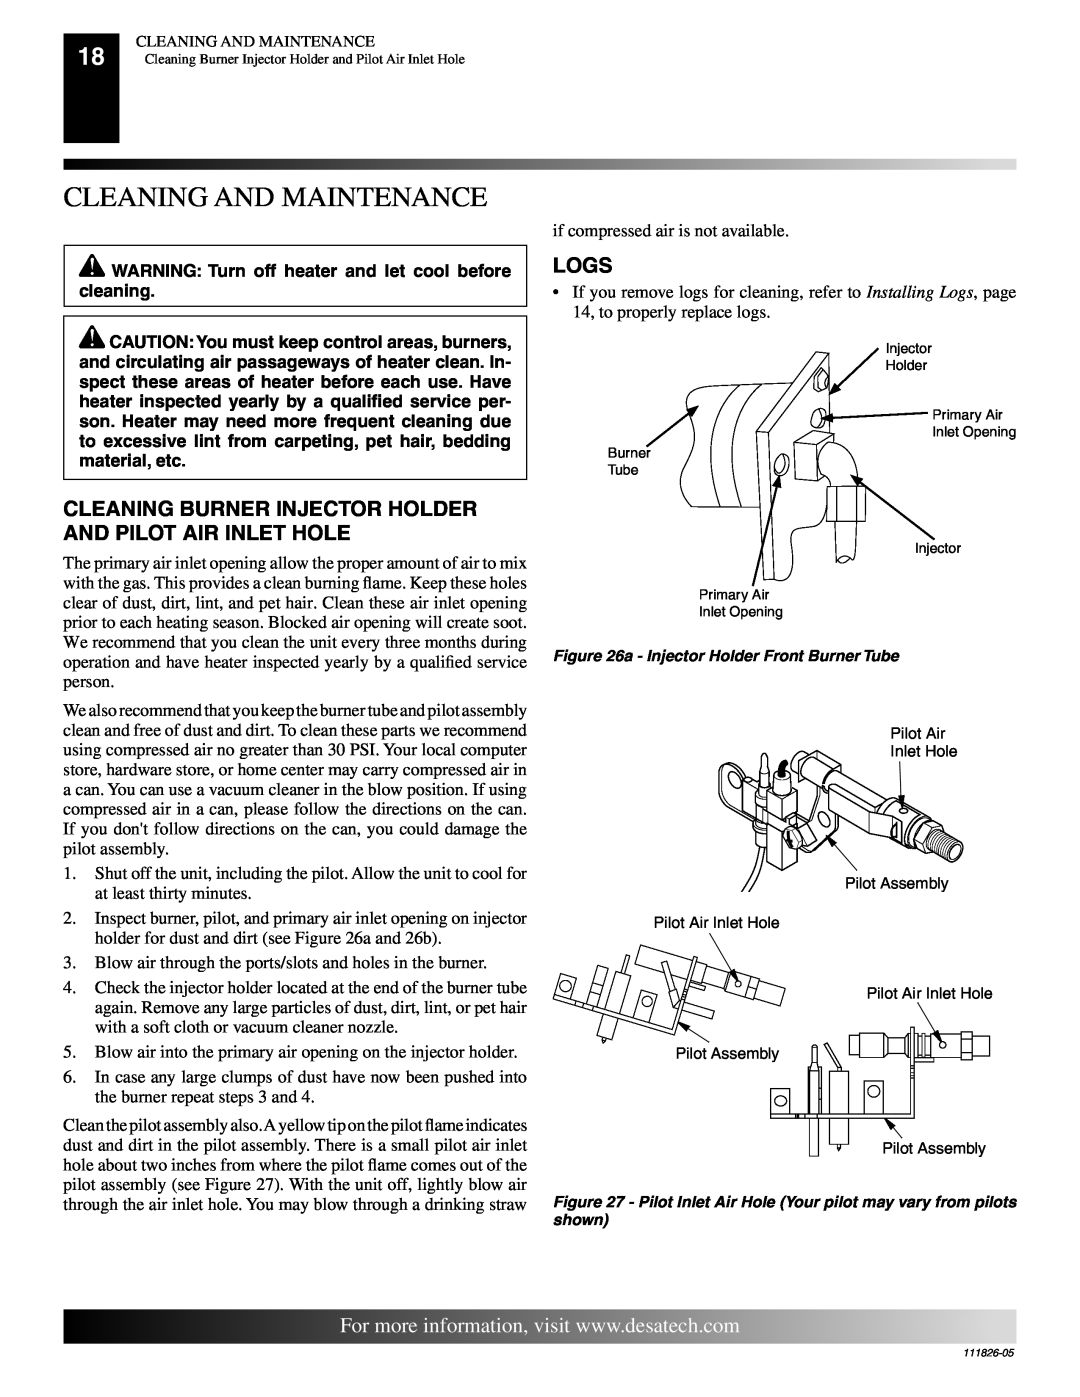 Desa VF-24P-EMU, VF-18P-EMU, VF-18N-EMU, VF-24N-EMU installation manual Cleaning And Maintenance, Logs 